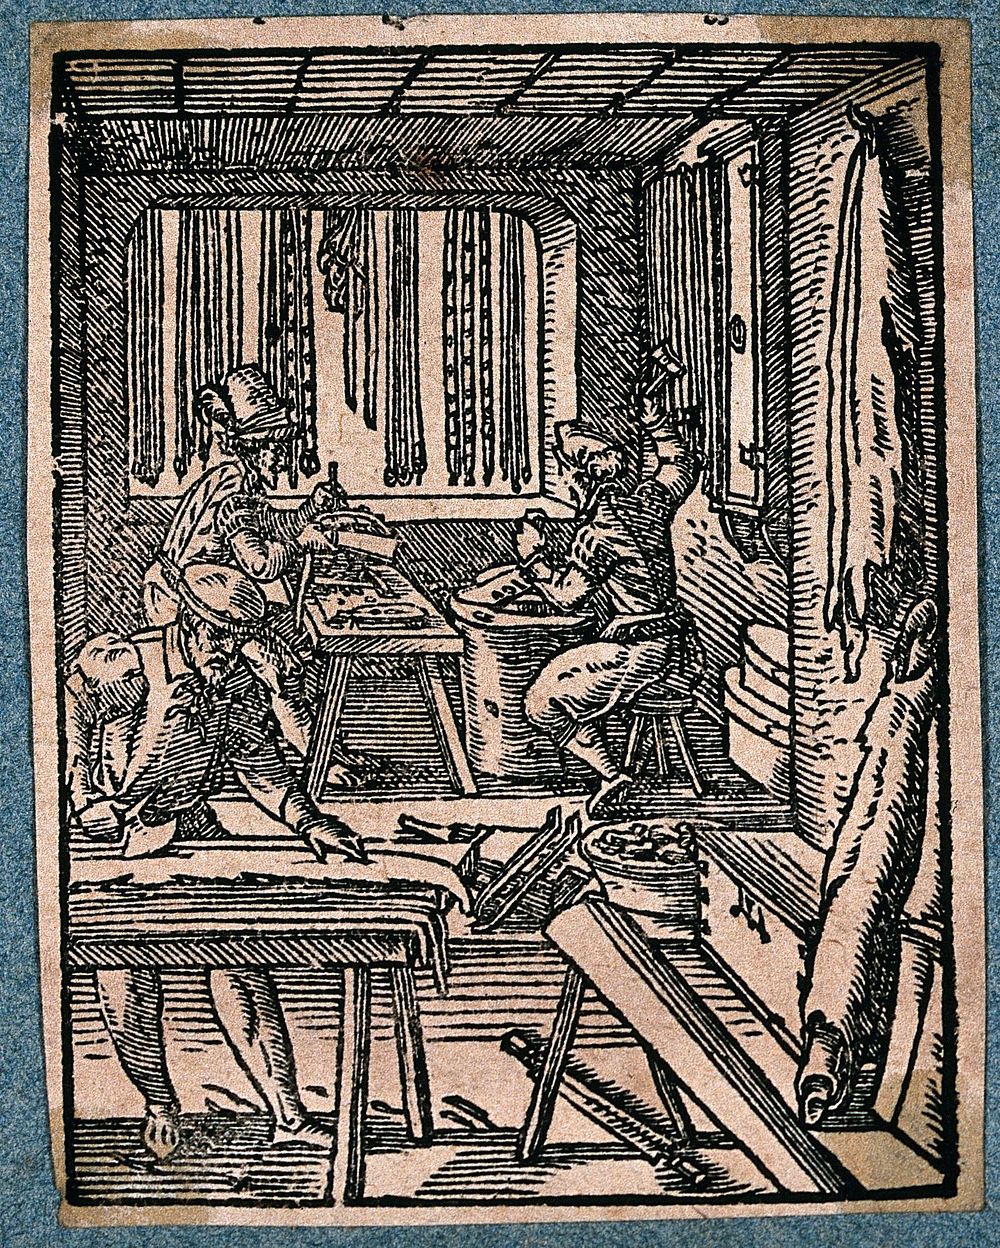 Makers of leather belts at work in their workshop. Woodcut by J. Amman.